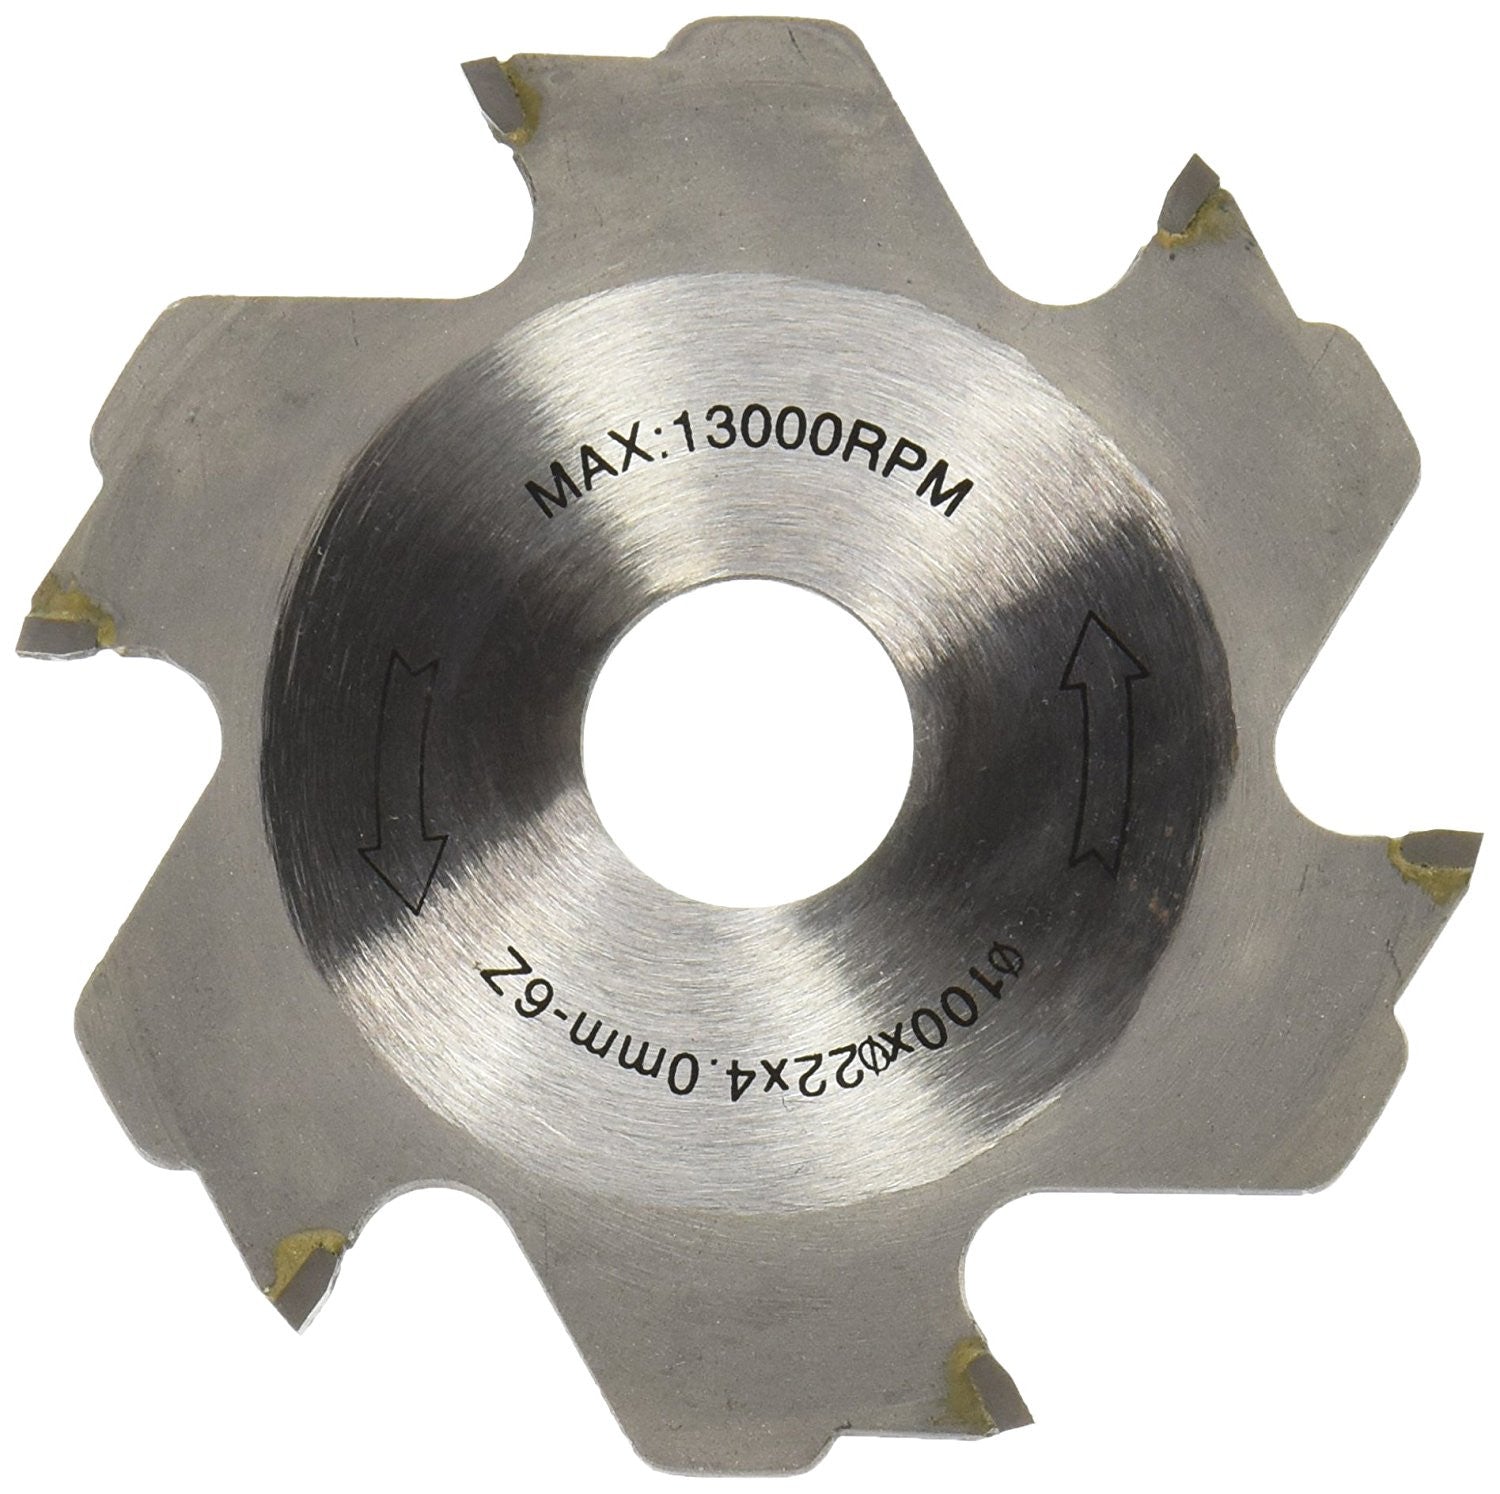 Replacement Carbide Tip Blade for Bisquit Joiners Jointers Tool Biscuit - tool